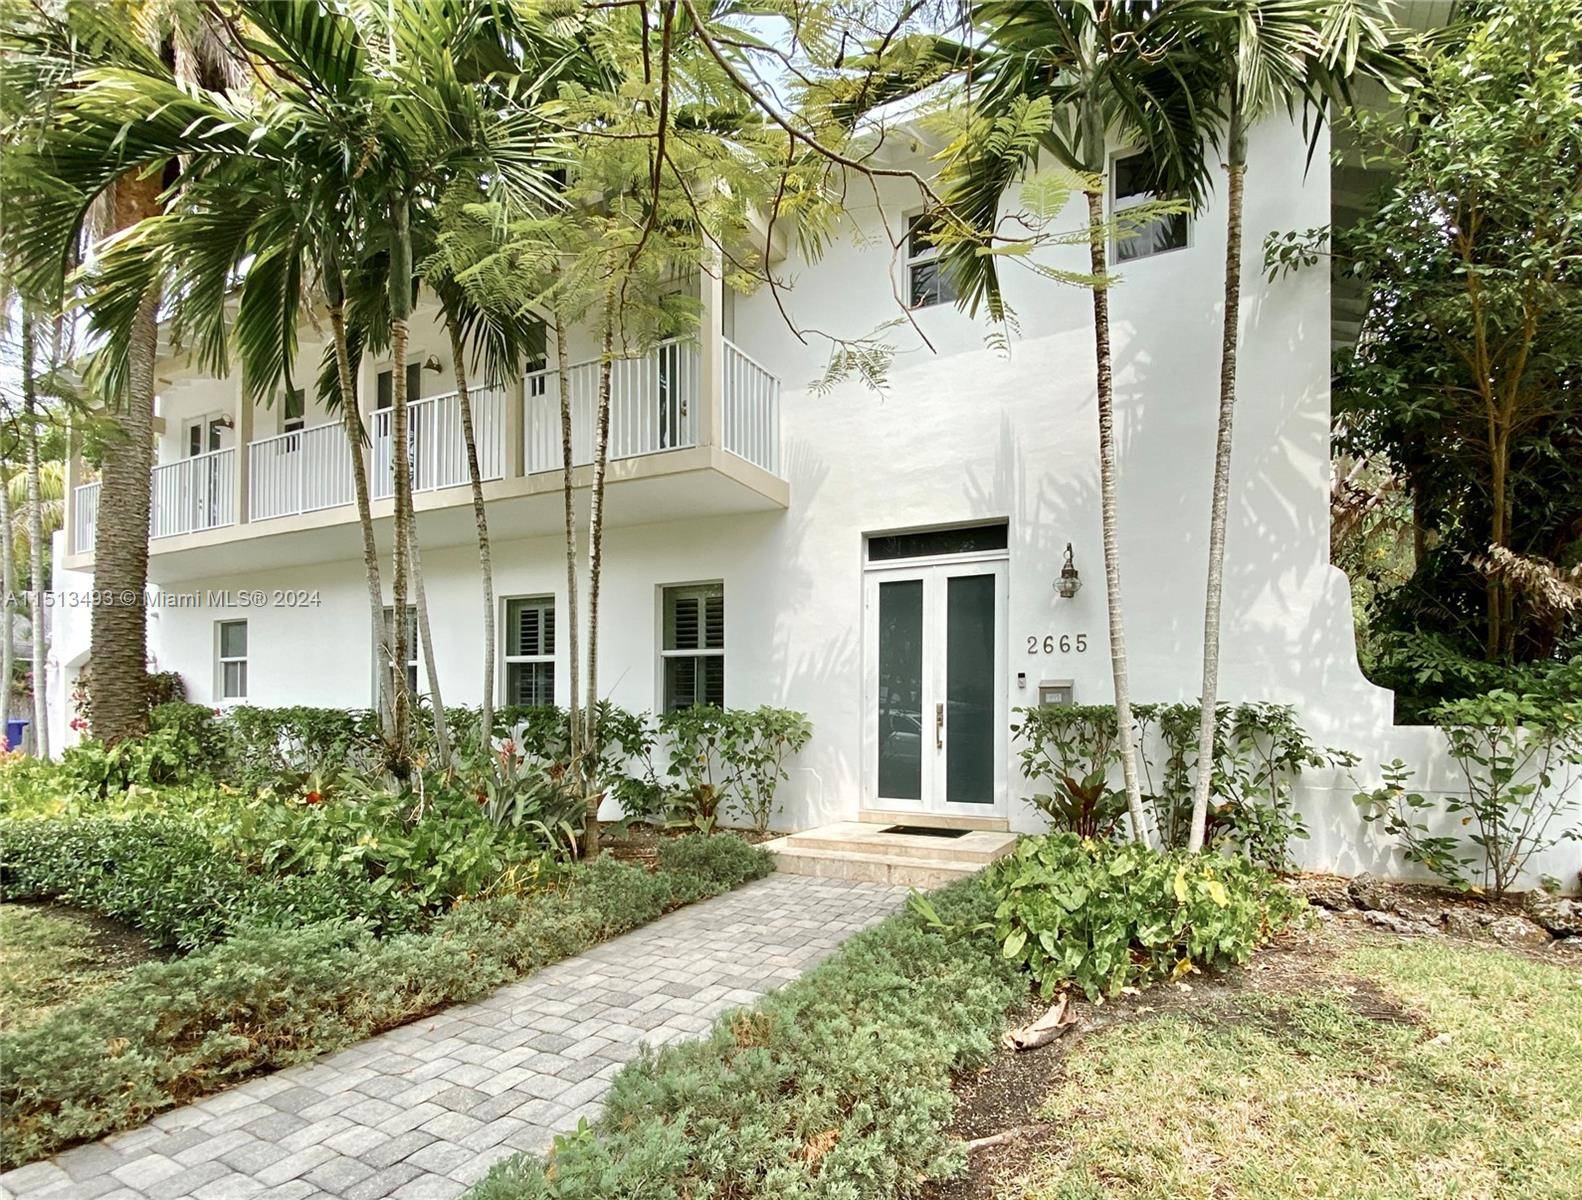 Introducing your cozy, updated Key West style home located on a serene street in desirable North Coconut Grove.